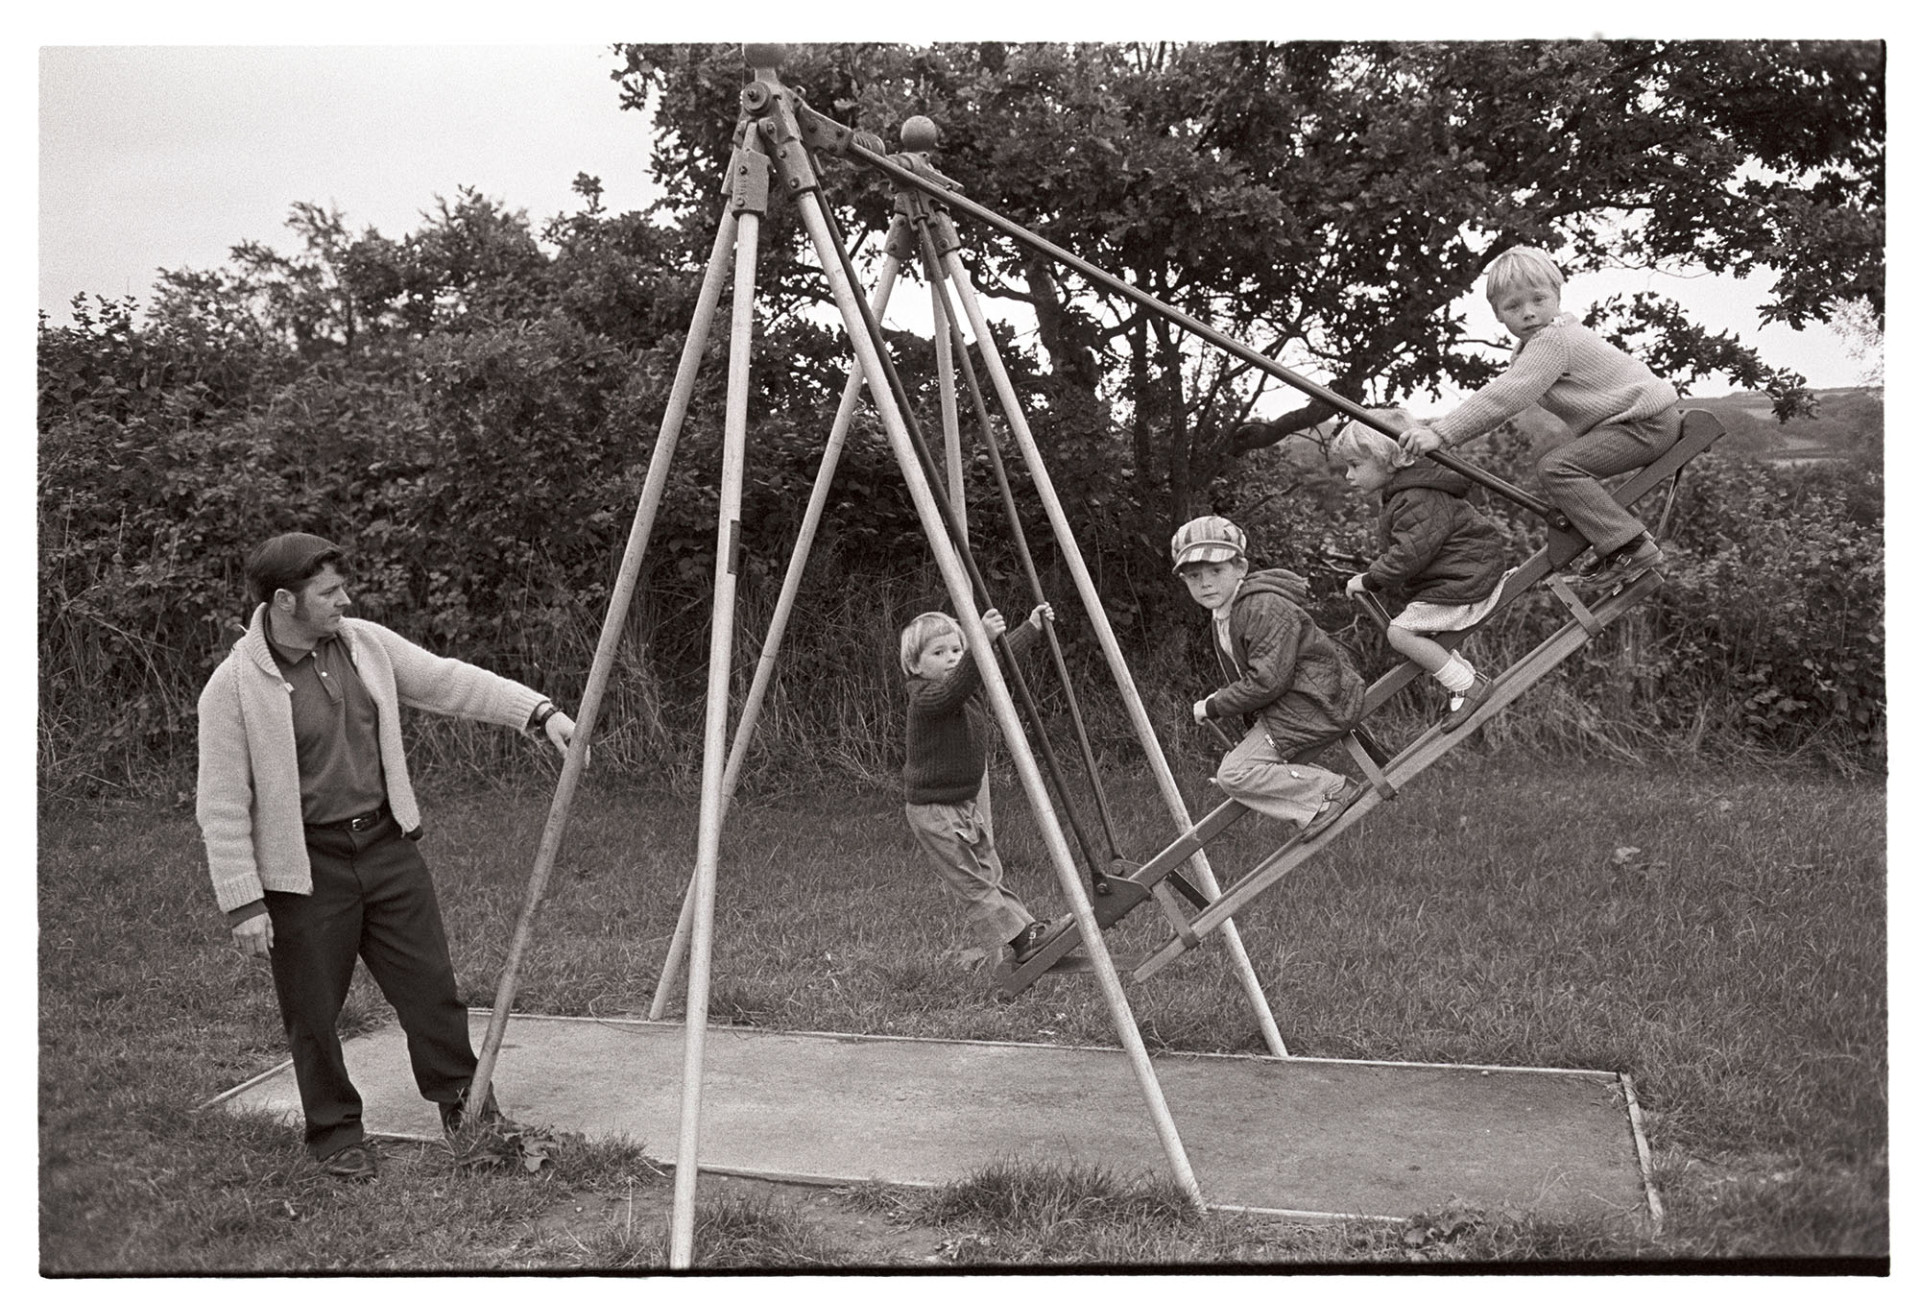 Children on new playground swings.
[A man pushing four children on new playground swings at Dolton Playing Fields.]